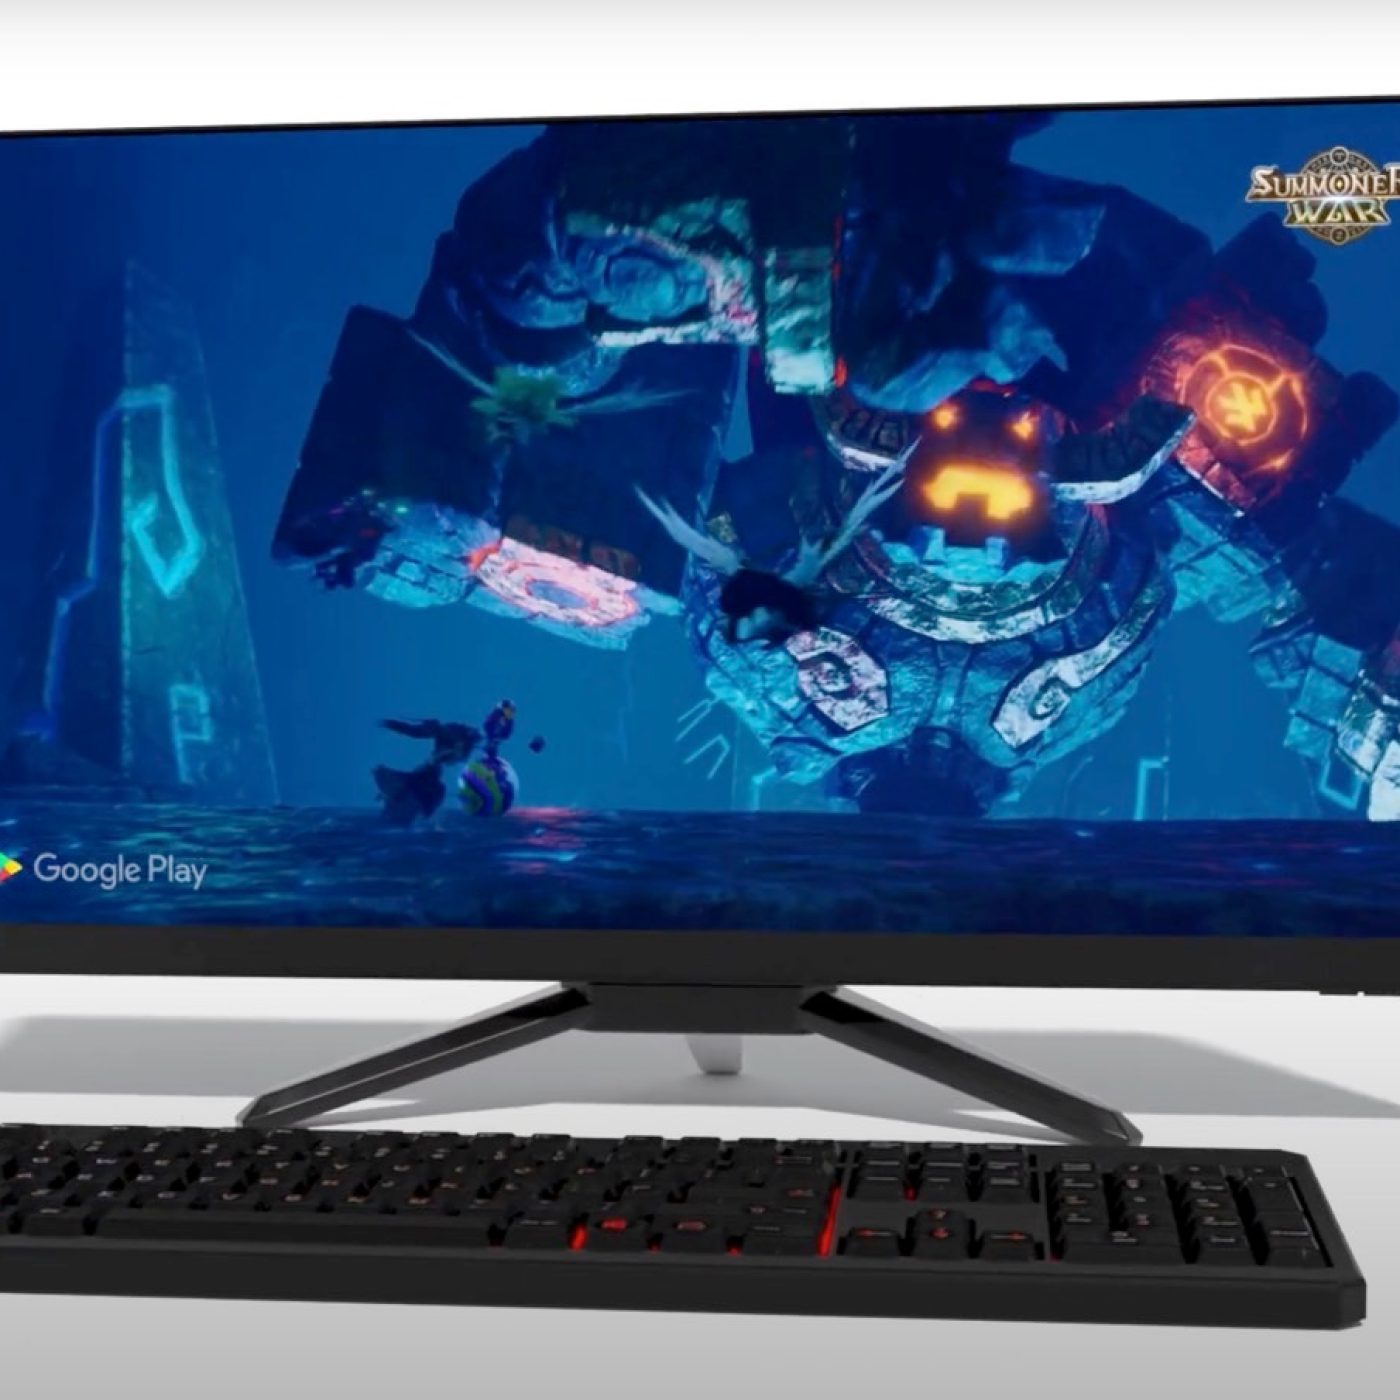 Google Play Games PC launches, brings more Android games to desktop